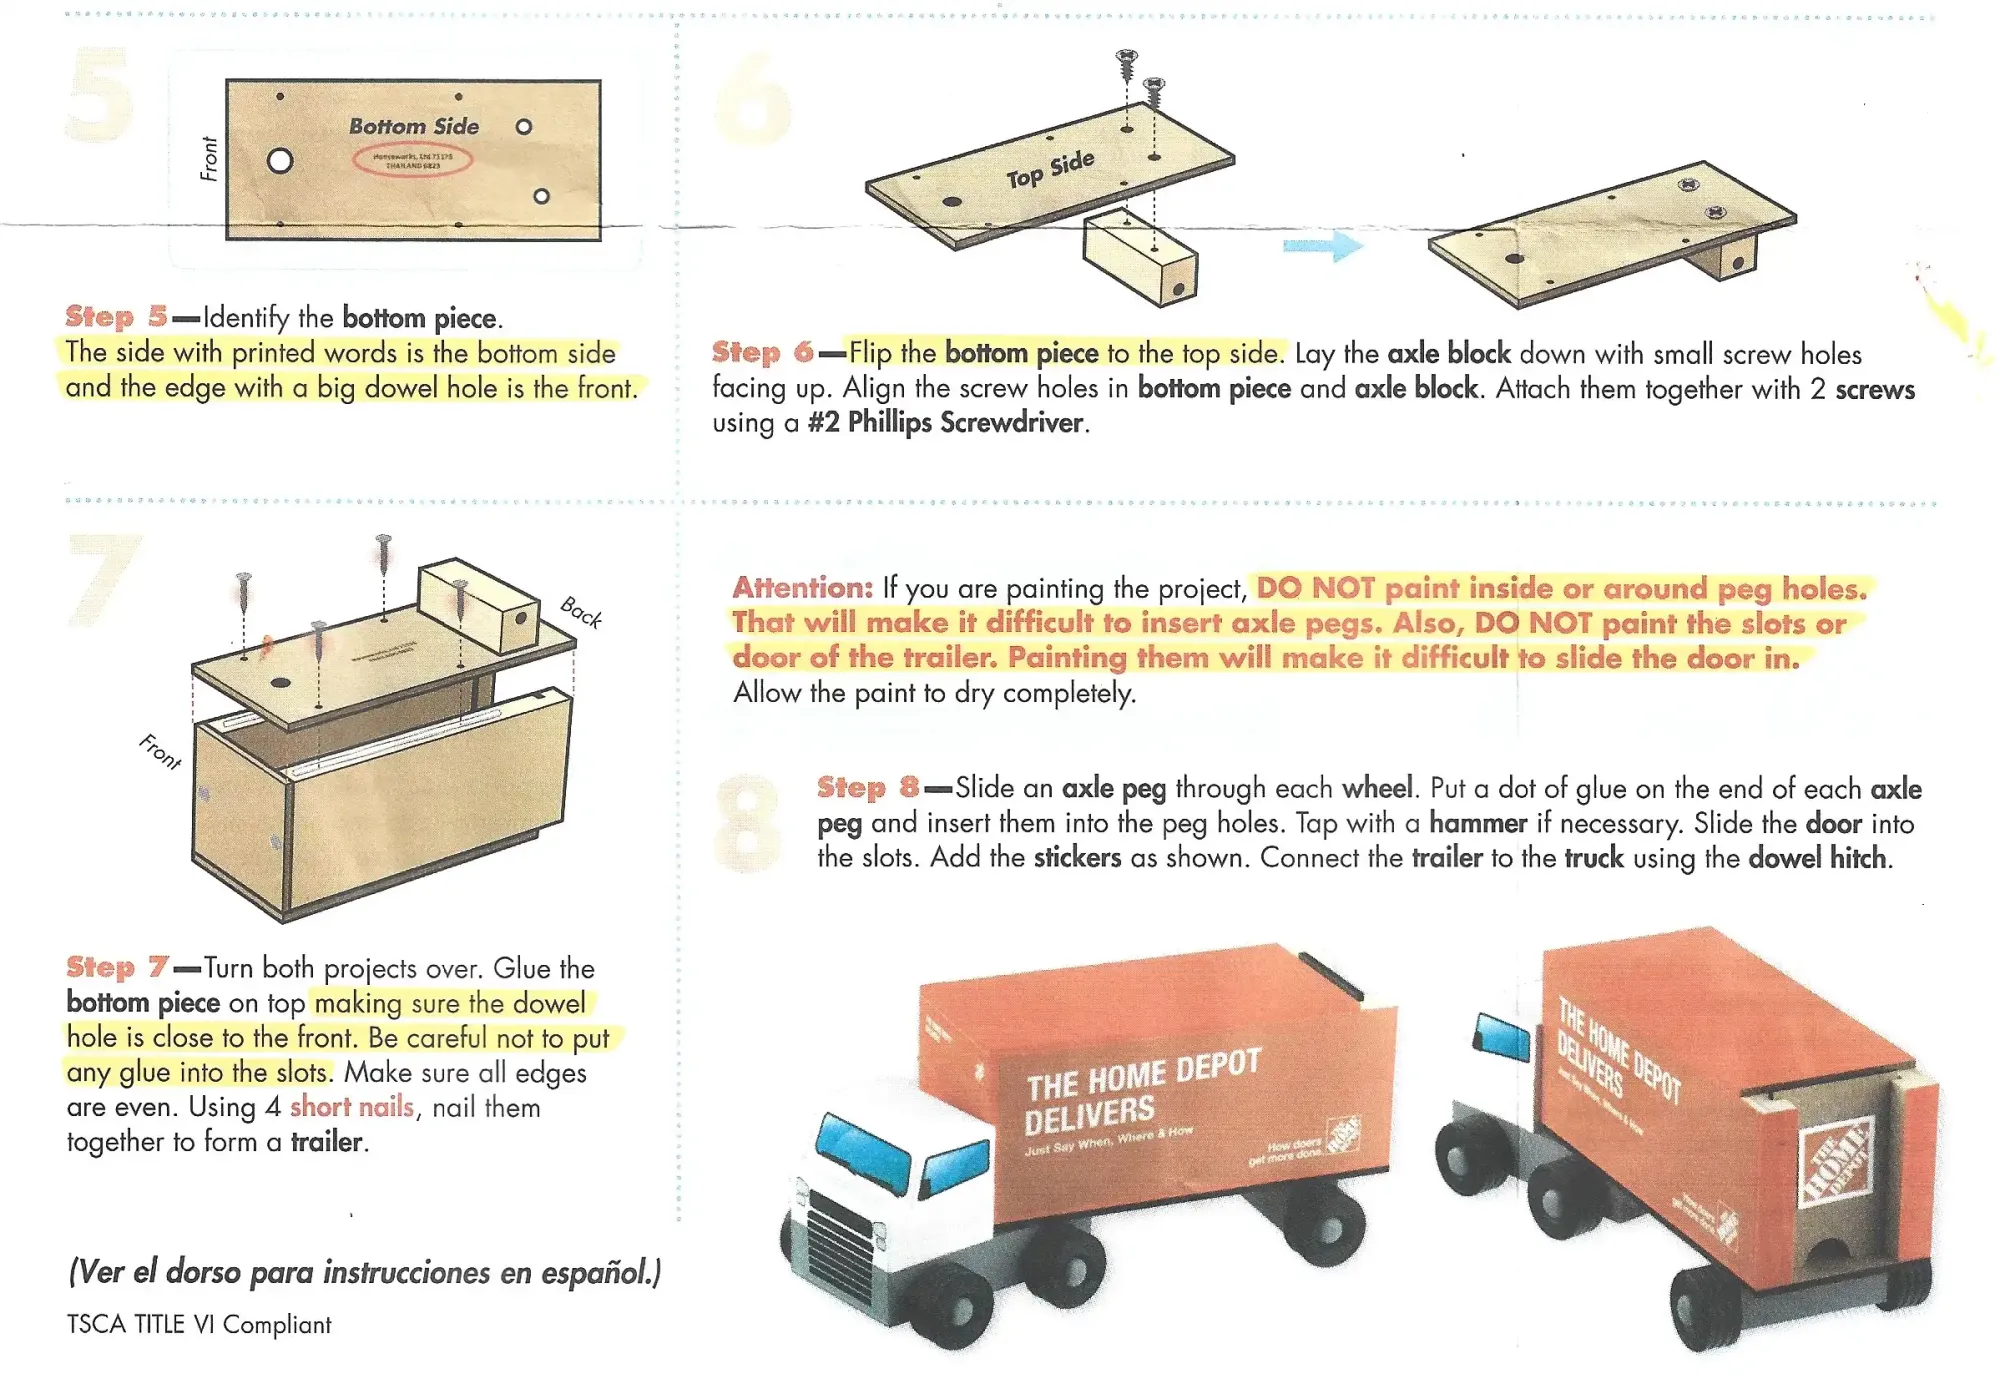 The Home Depot Kids Workshops Delivery Truck Instructions English 2